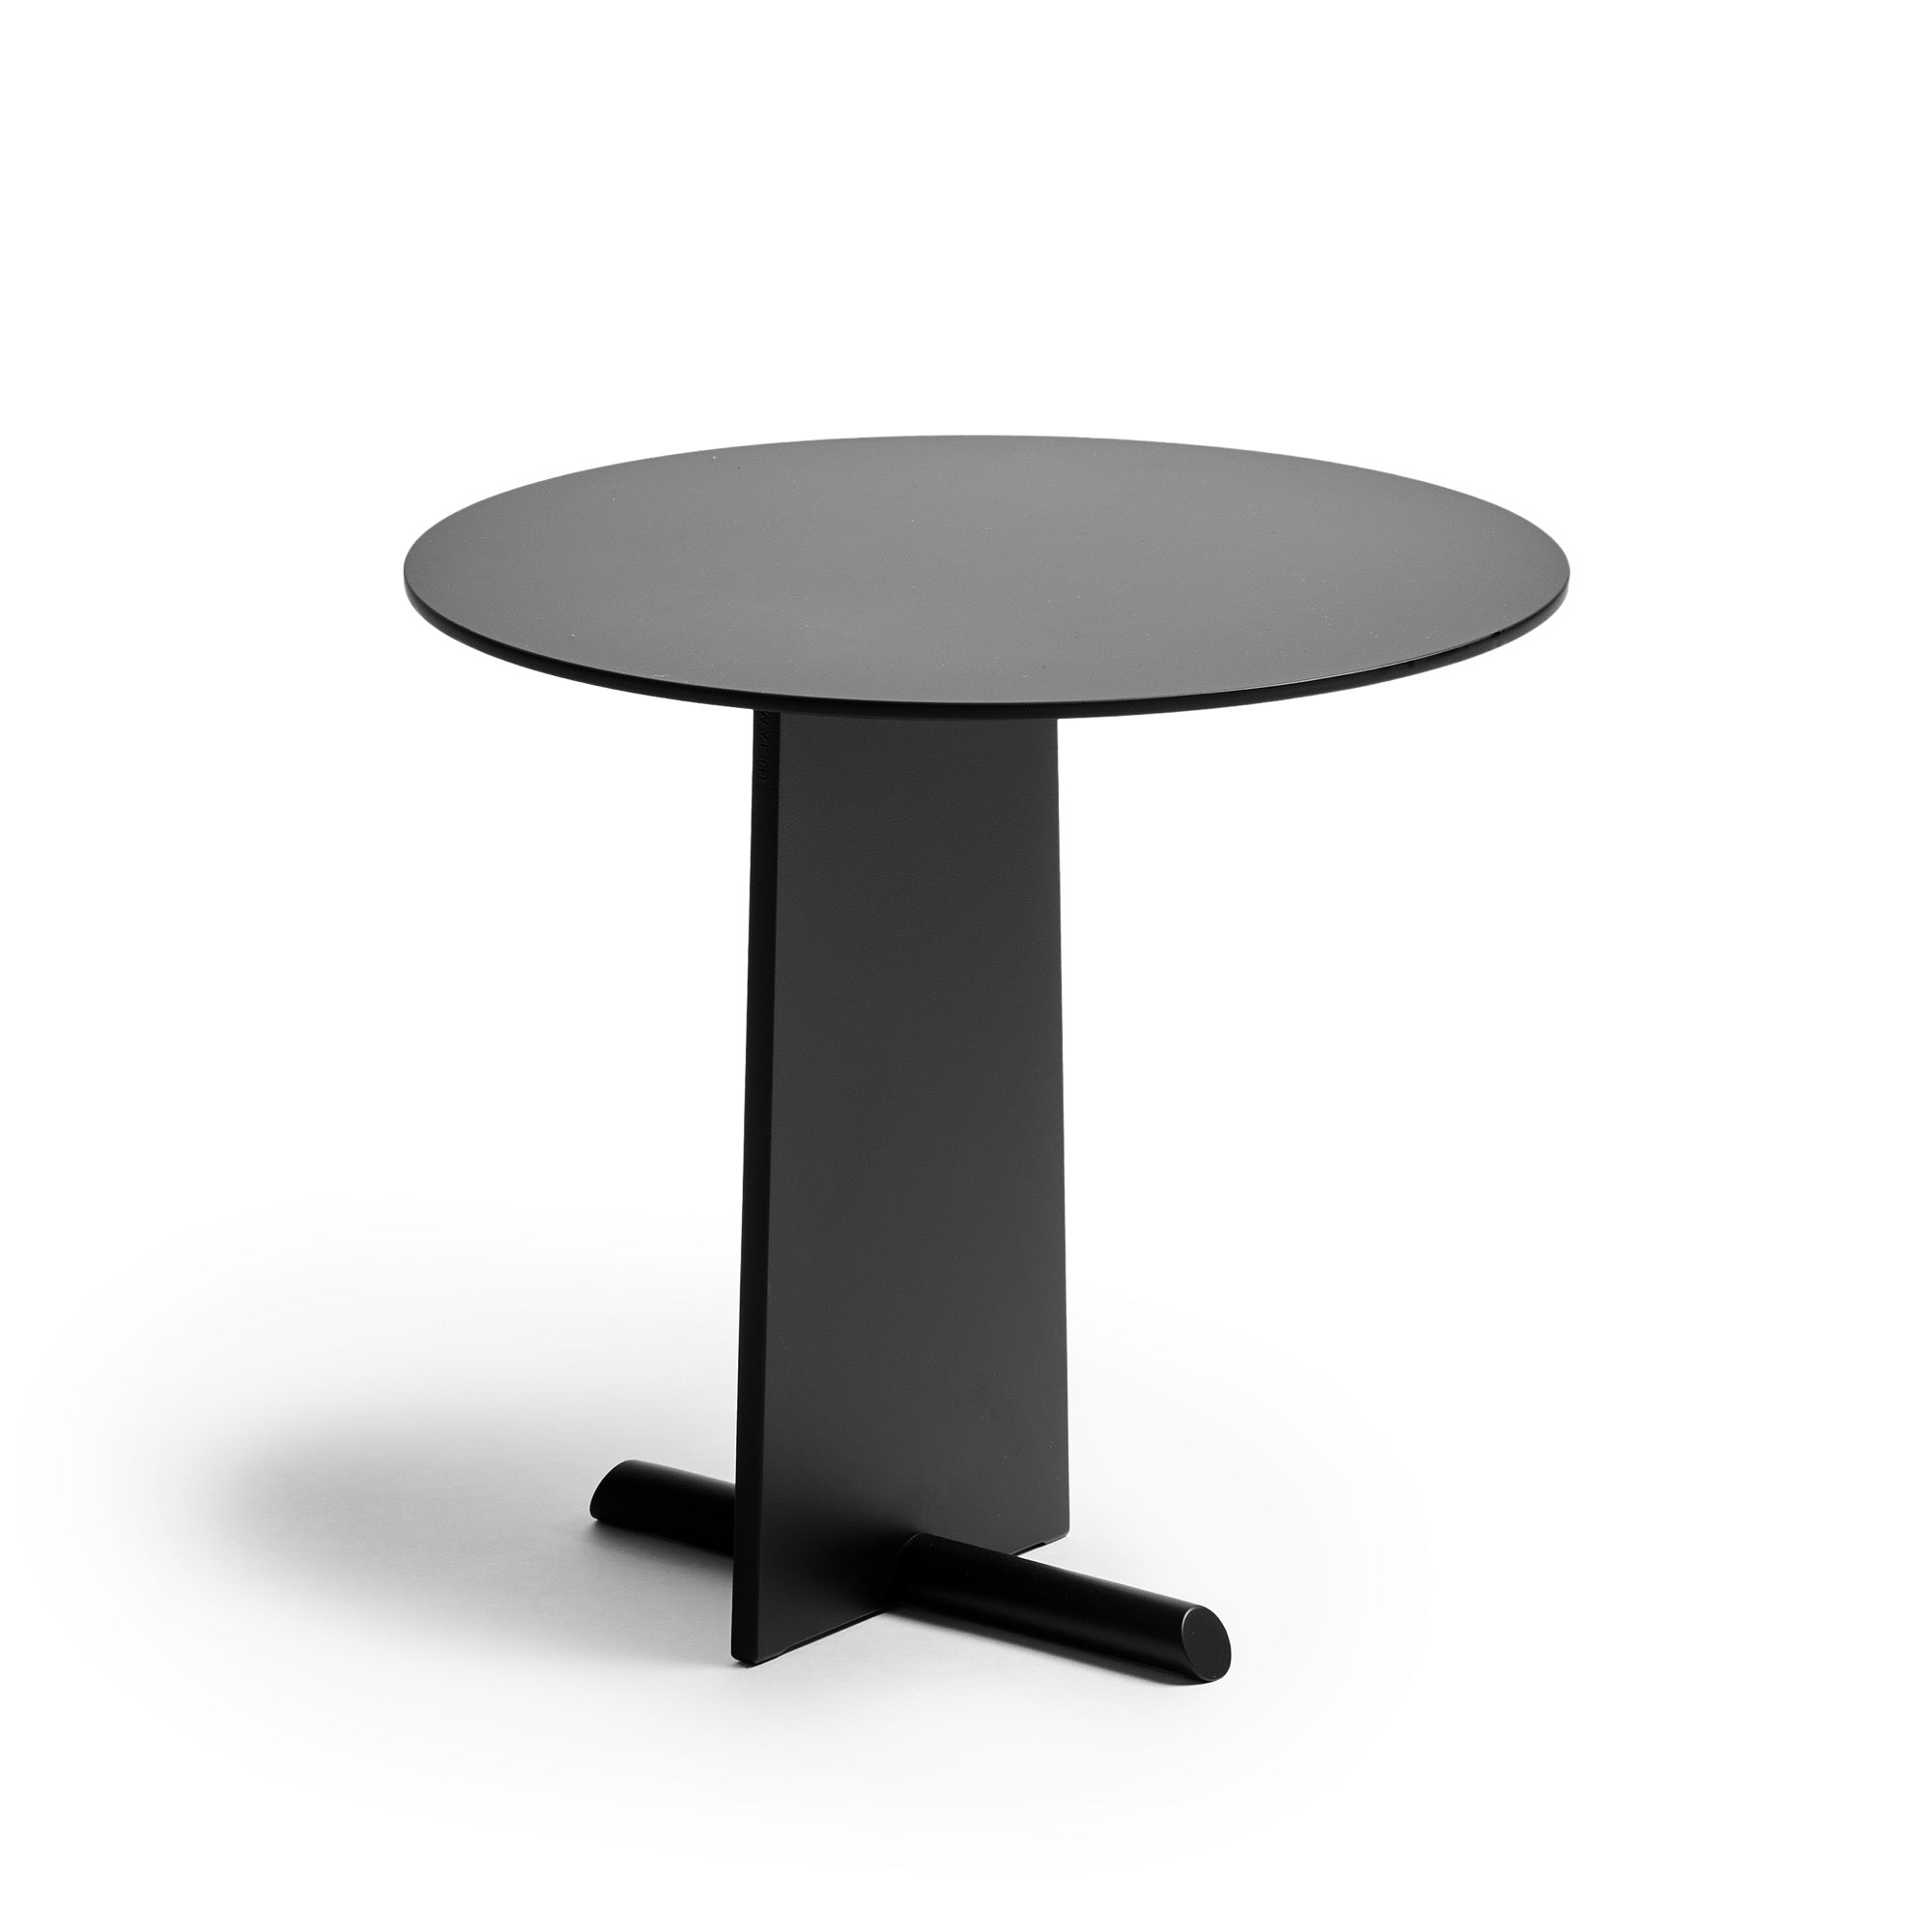 The George Table in Black by WYETH, 2020